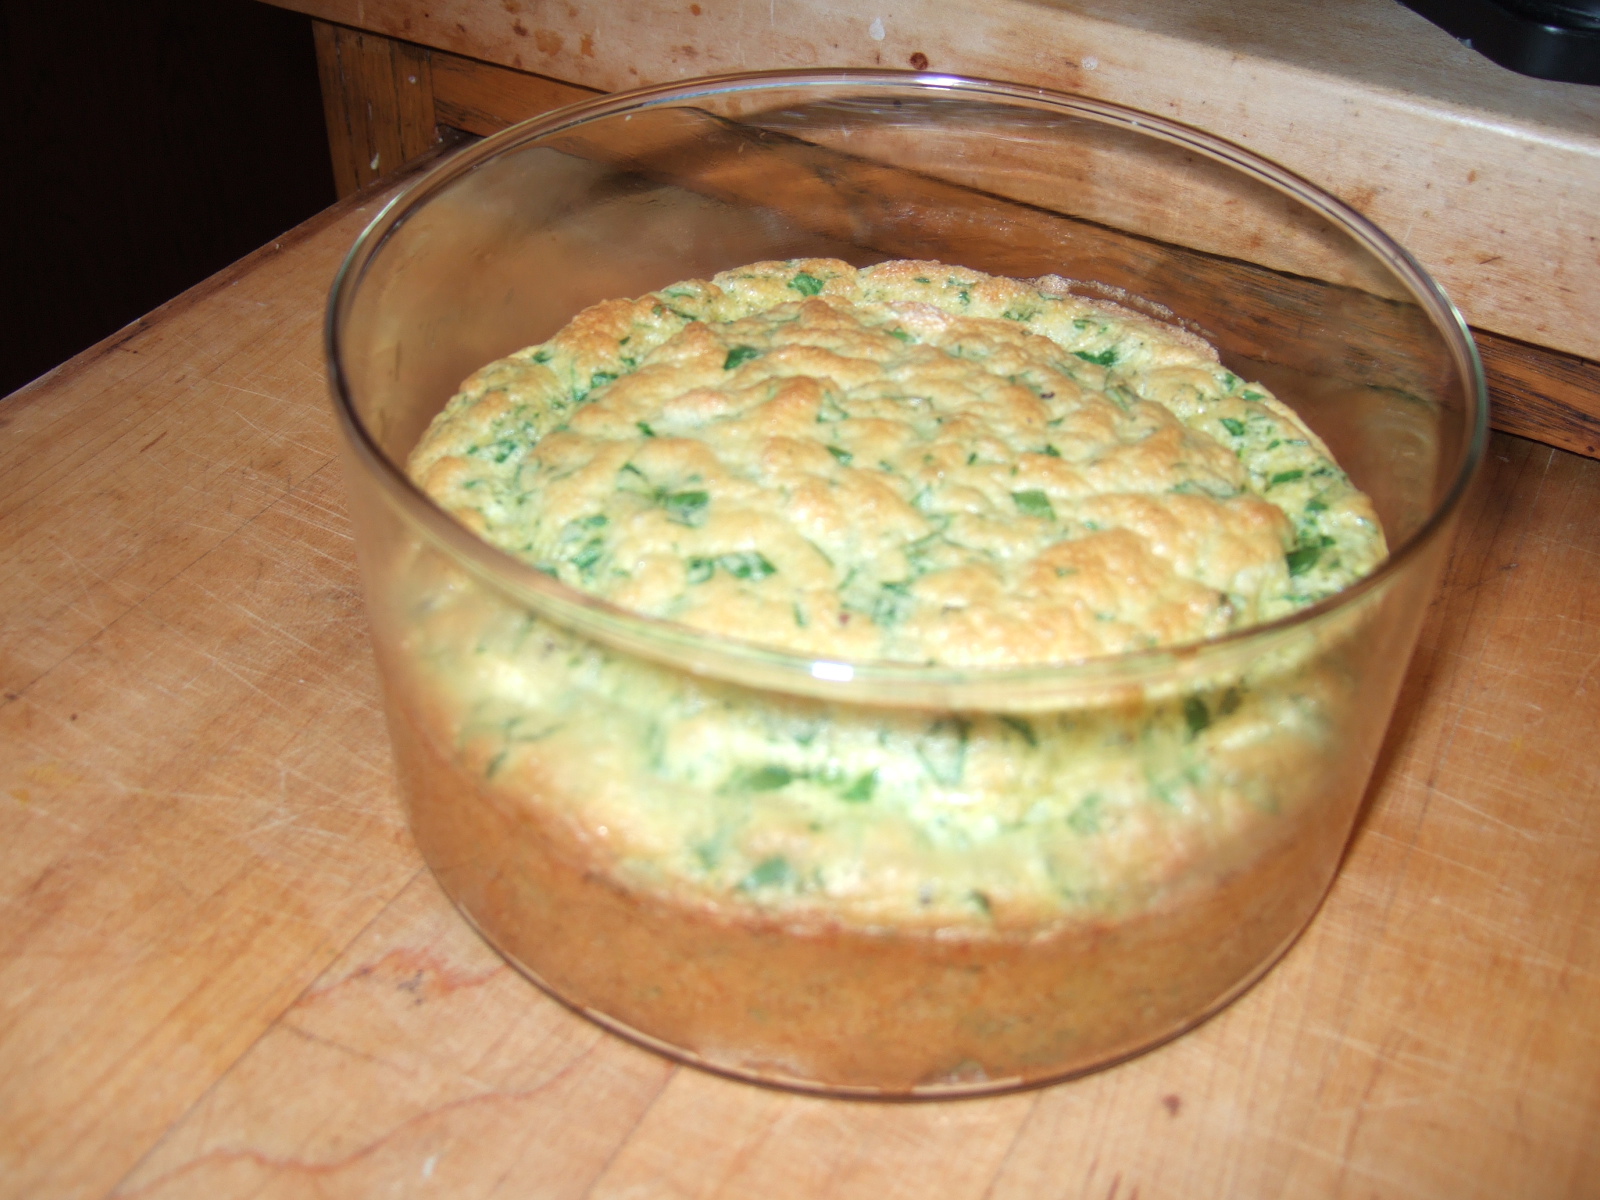 A spinach soufflé in its baking glass, fresh out of the oven.